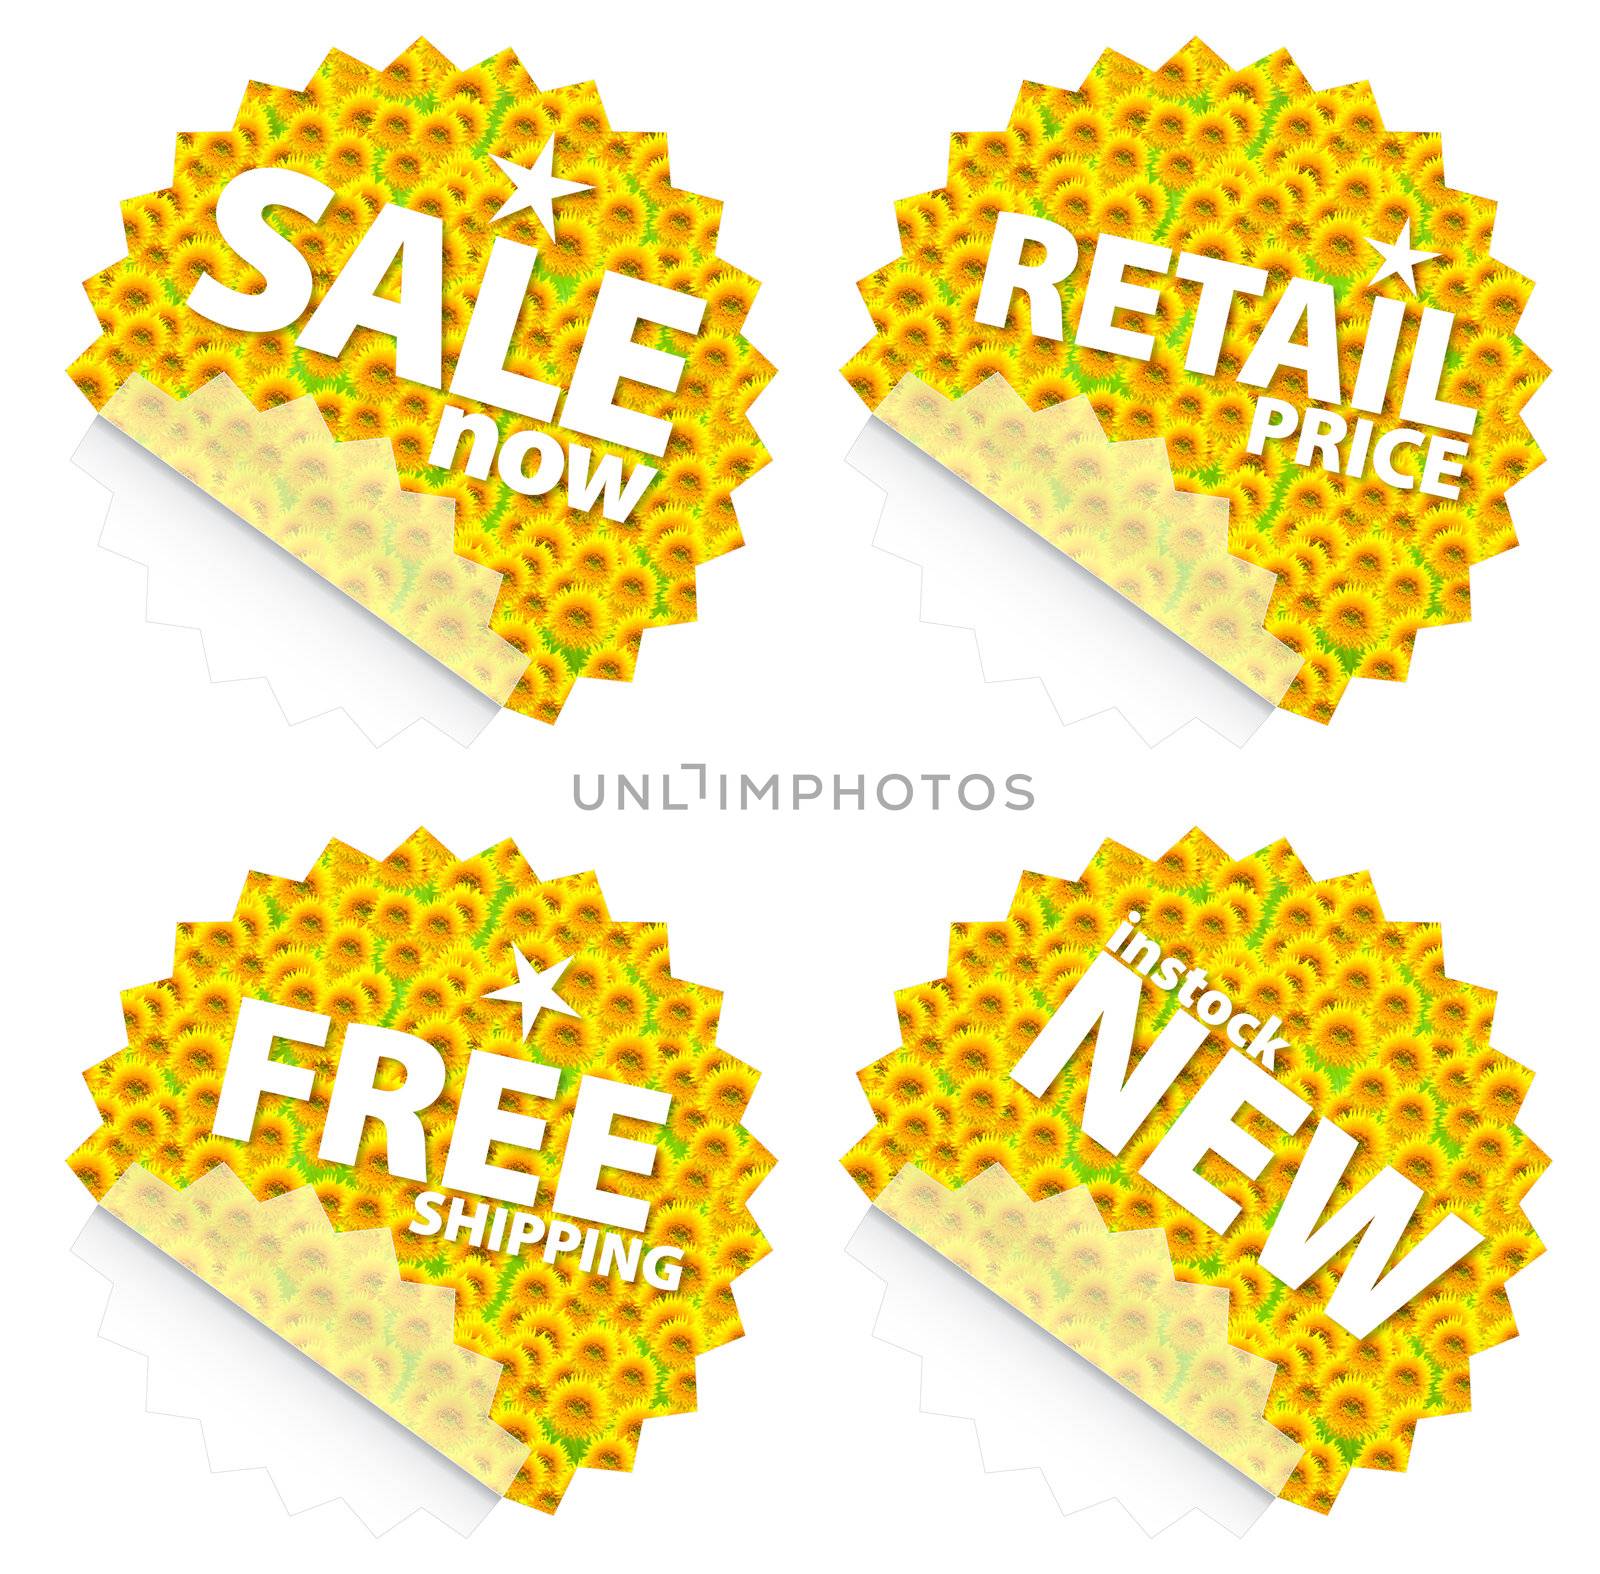 Illustration of beautiful sunflower retail stickers. Themes include sales, free shipping, retail price and new item in stock. Set 4.